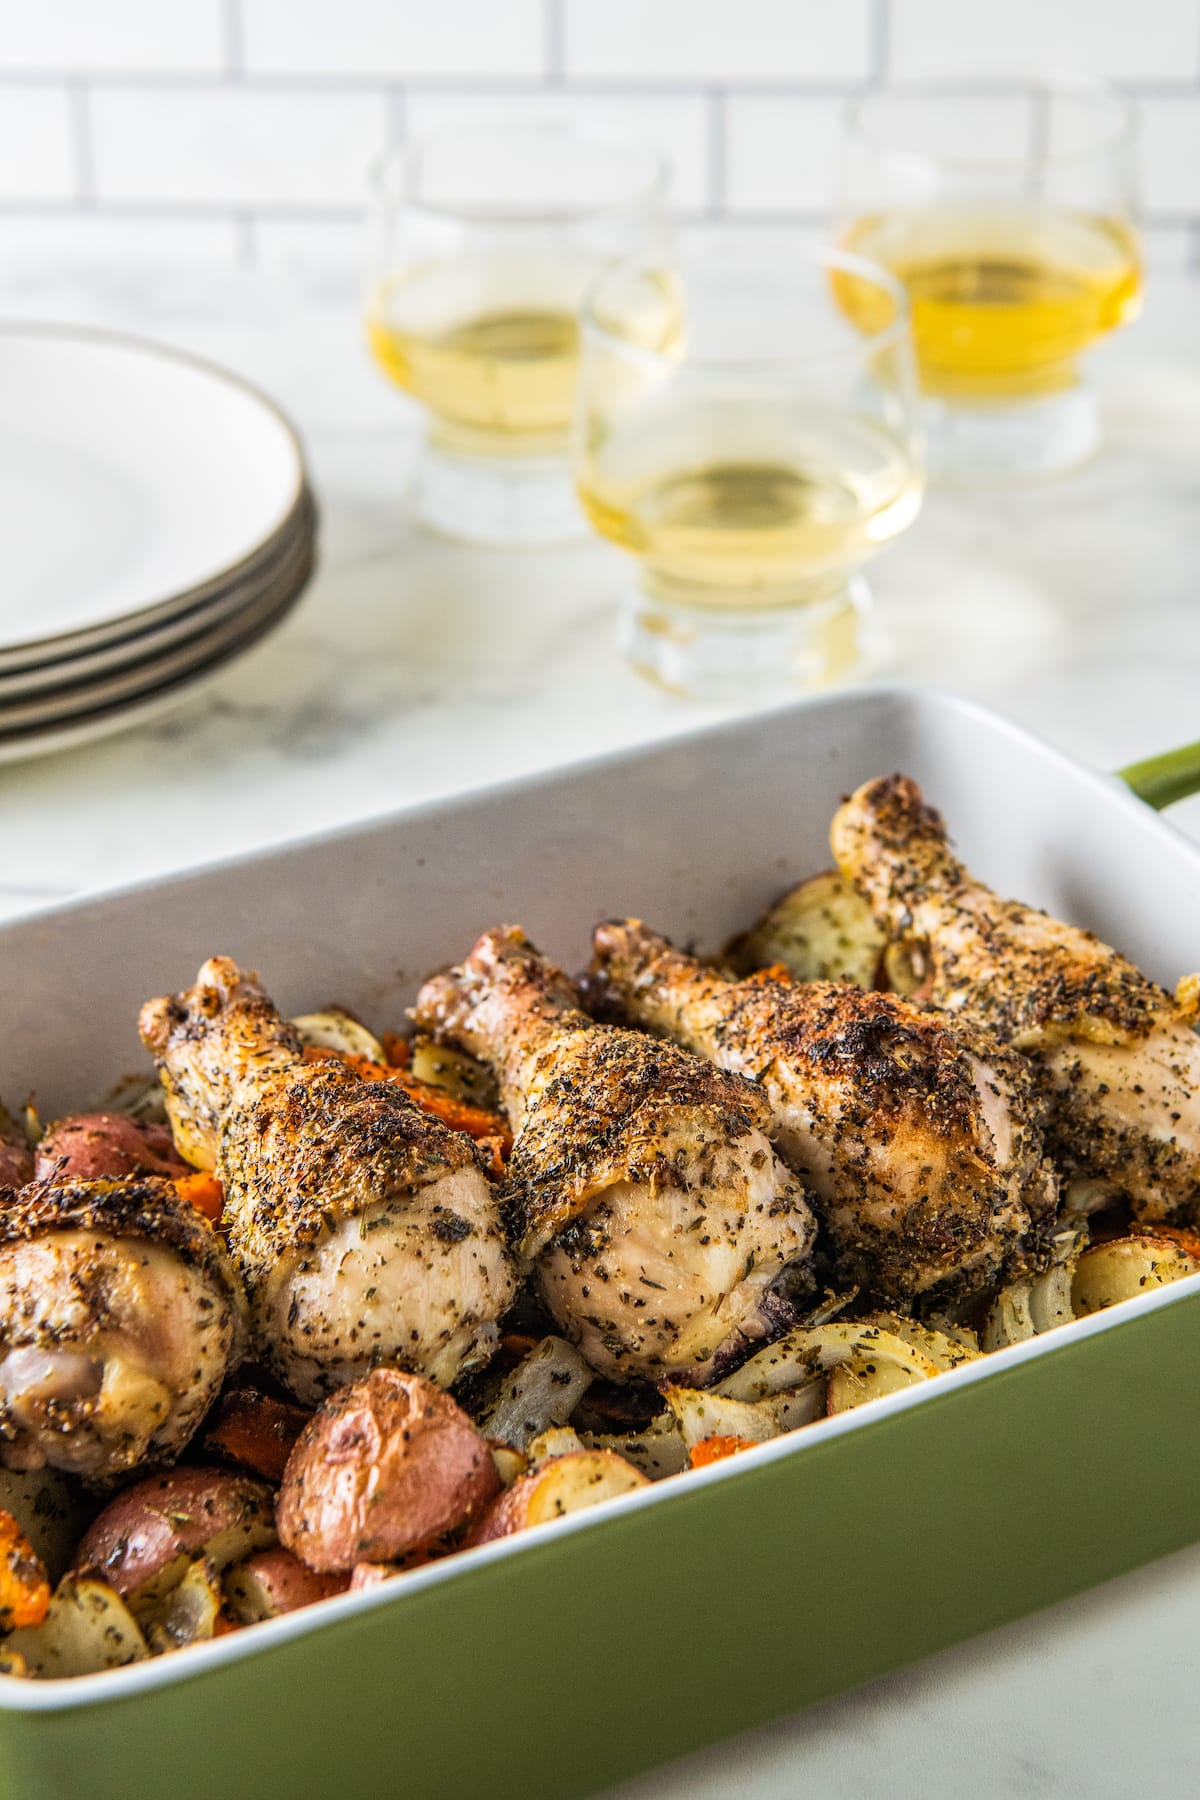 seasoned chicken legs in a baking dish on top of a vegetable assortment